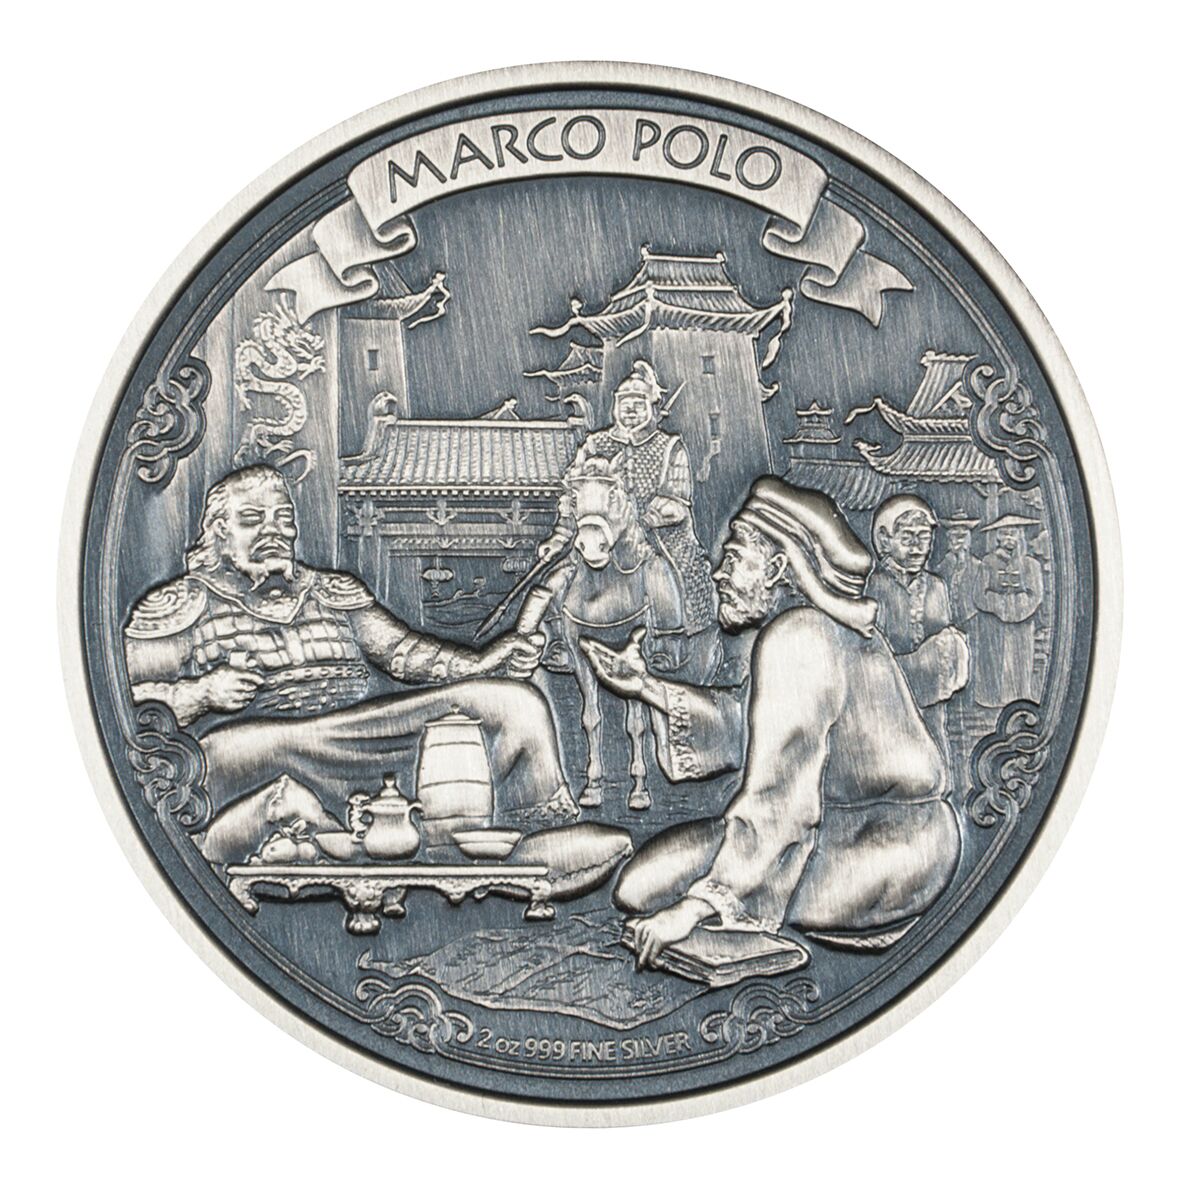 Coins Australia - 2015 Journeys of Discovery – Marco Polo 2oz Silver